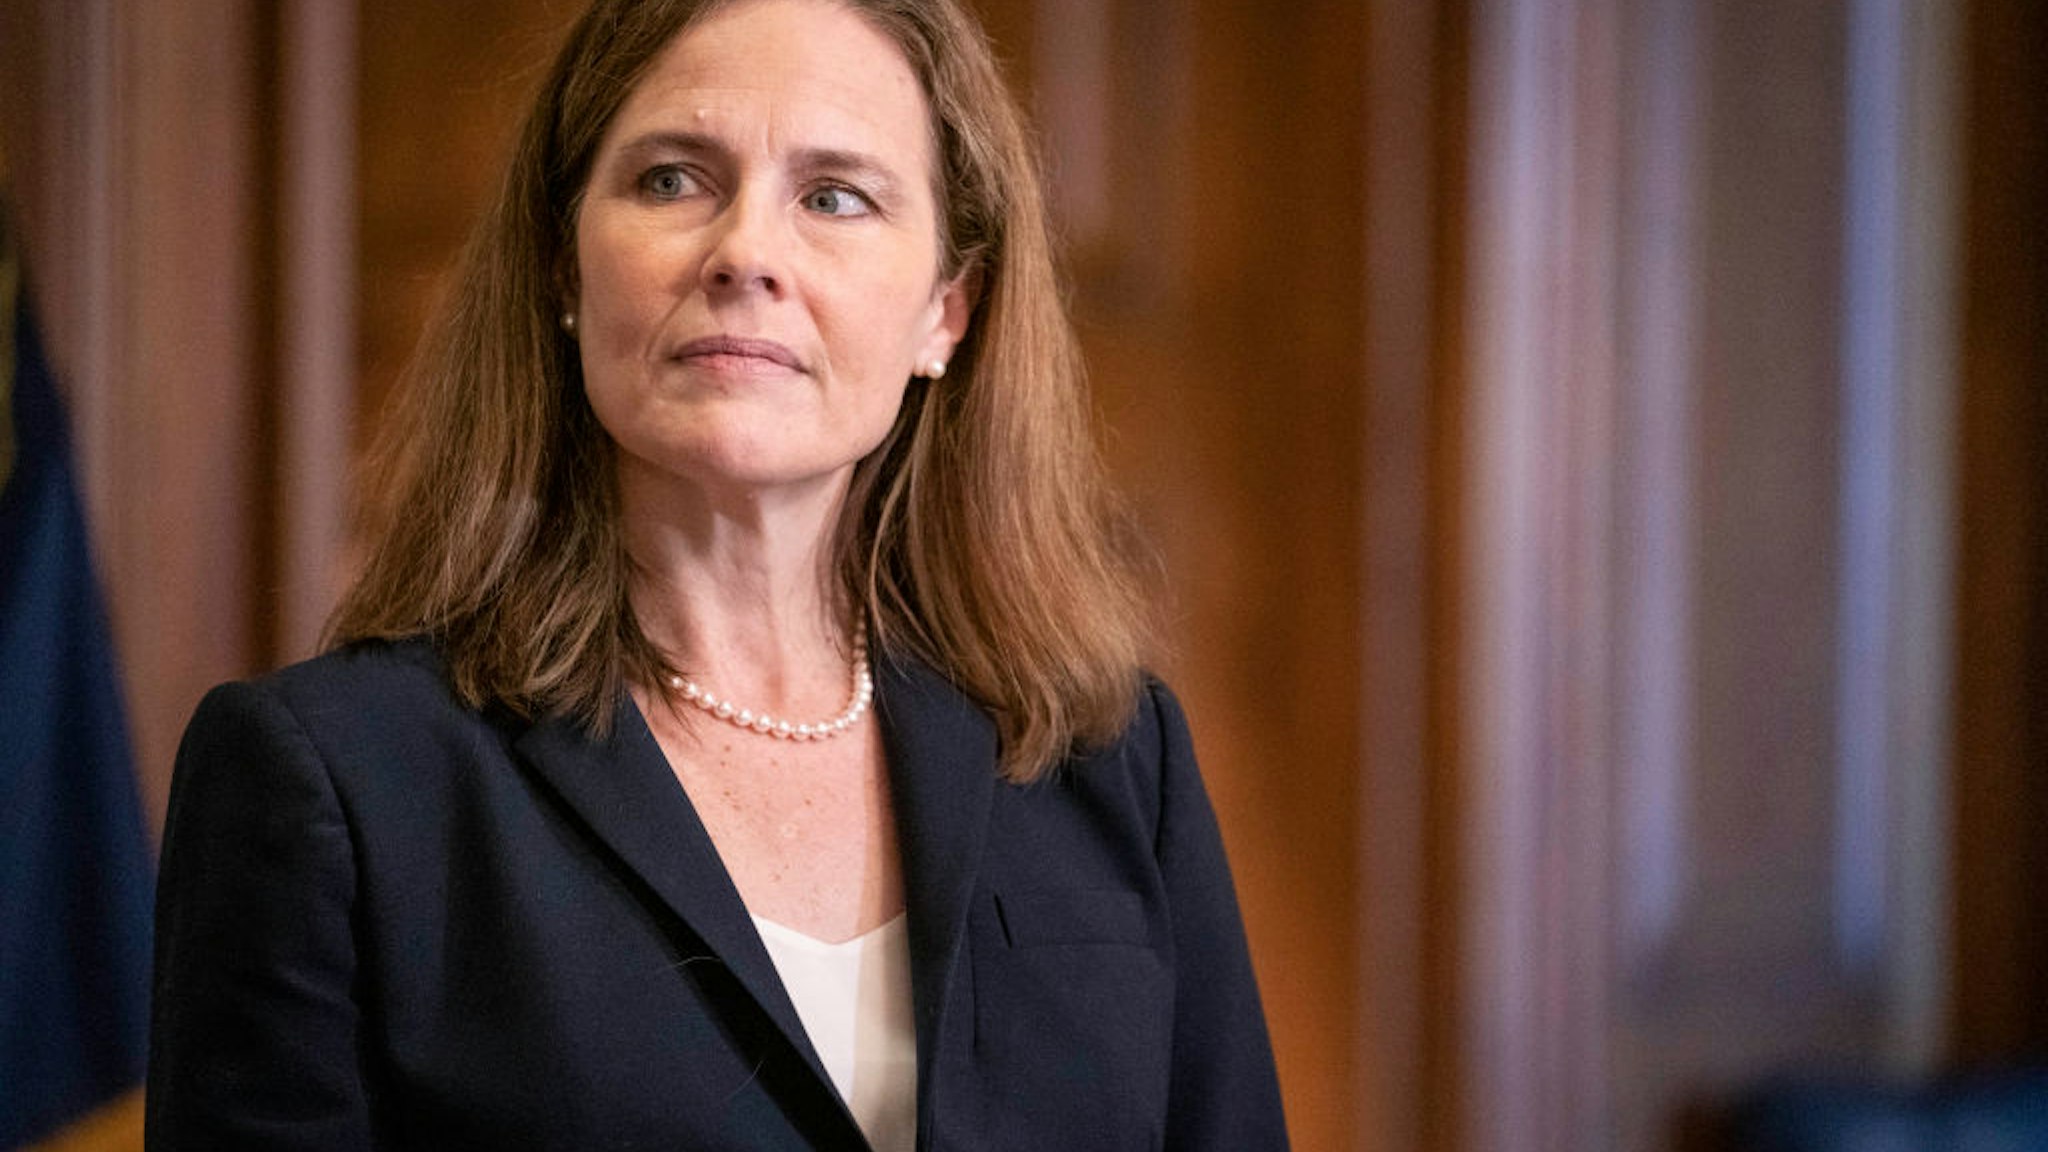 Supreme Court nominee Judge Amy Coney Barrett meets with U.S. Sen. James Lankford (R-OK) on October 21, 2020 in Washington, DC.